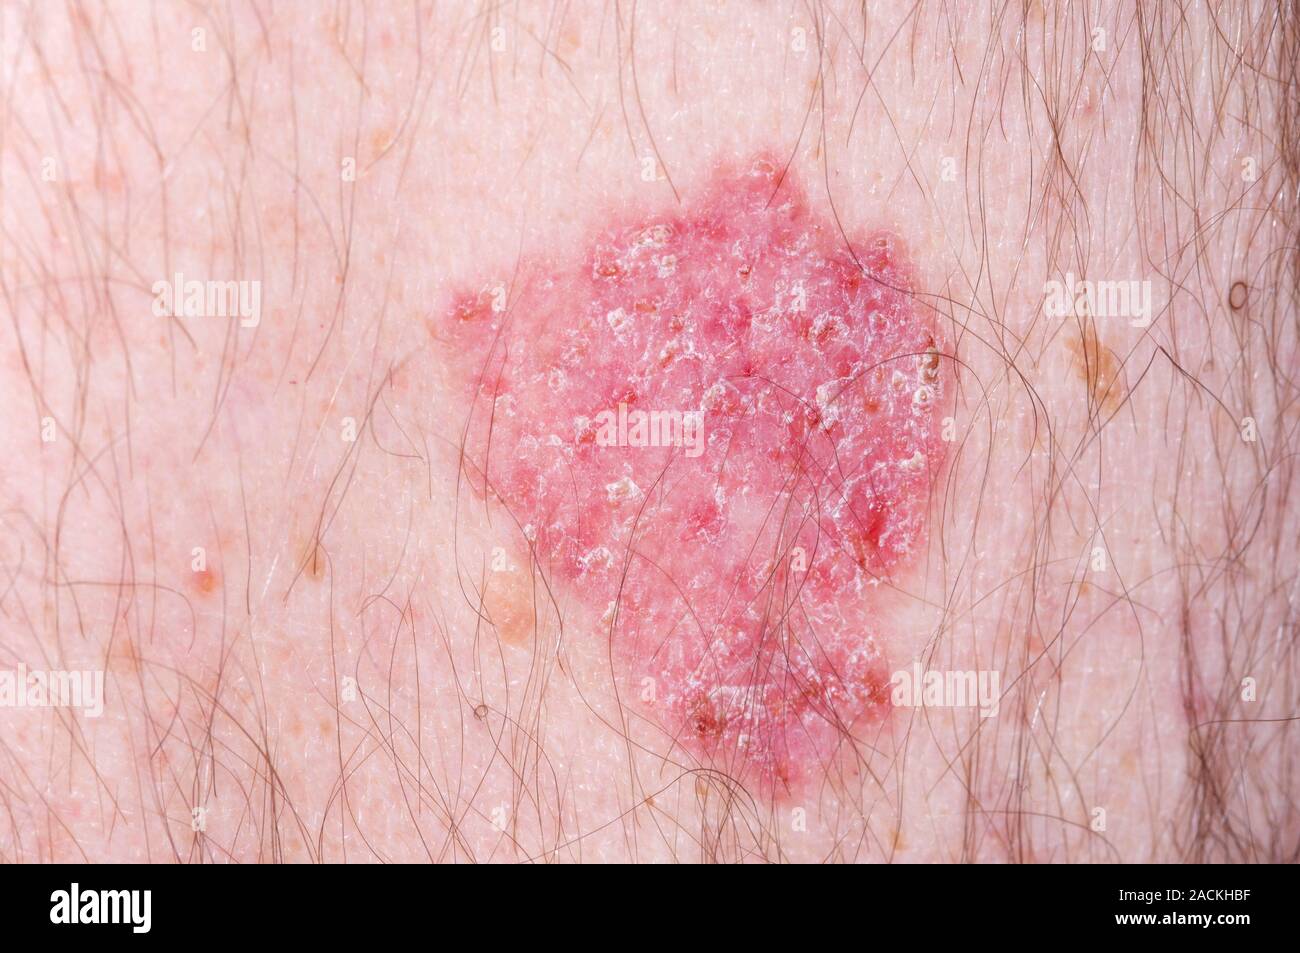 Close Up Of A Basal Cell Carcinoma Skin Cancer That Is Superficial